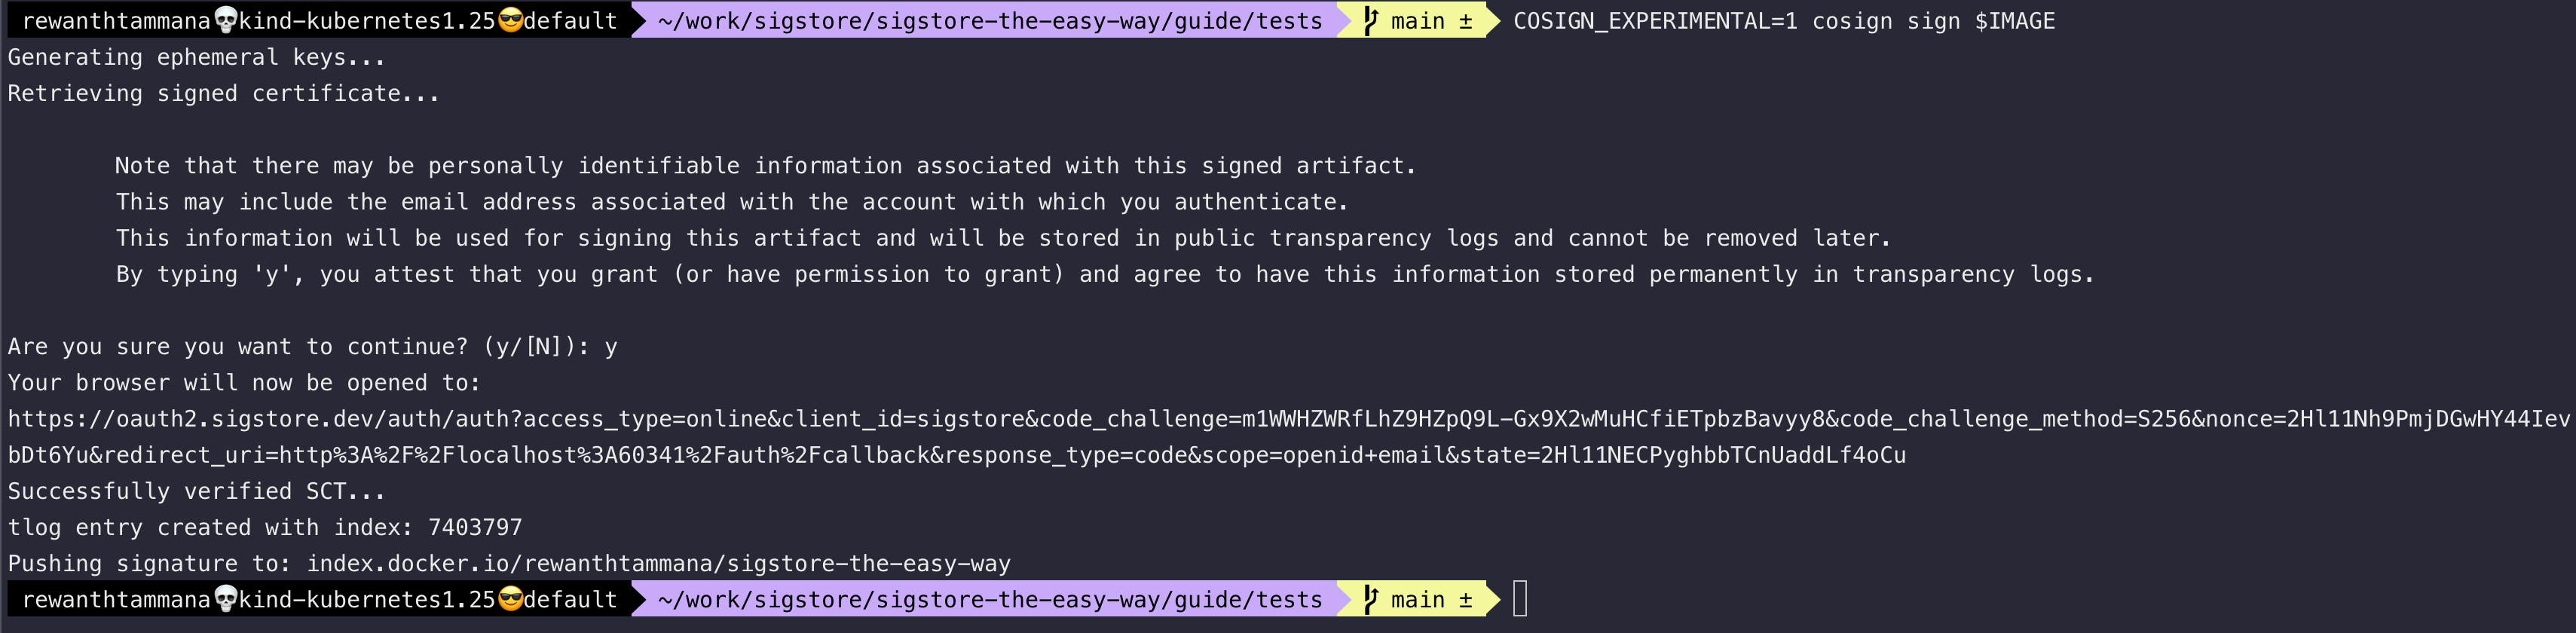 cosign-keyless-signing-cli-sign